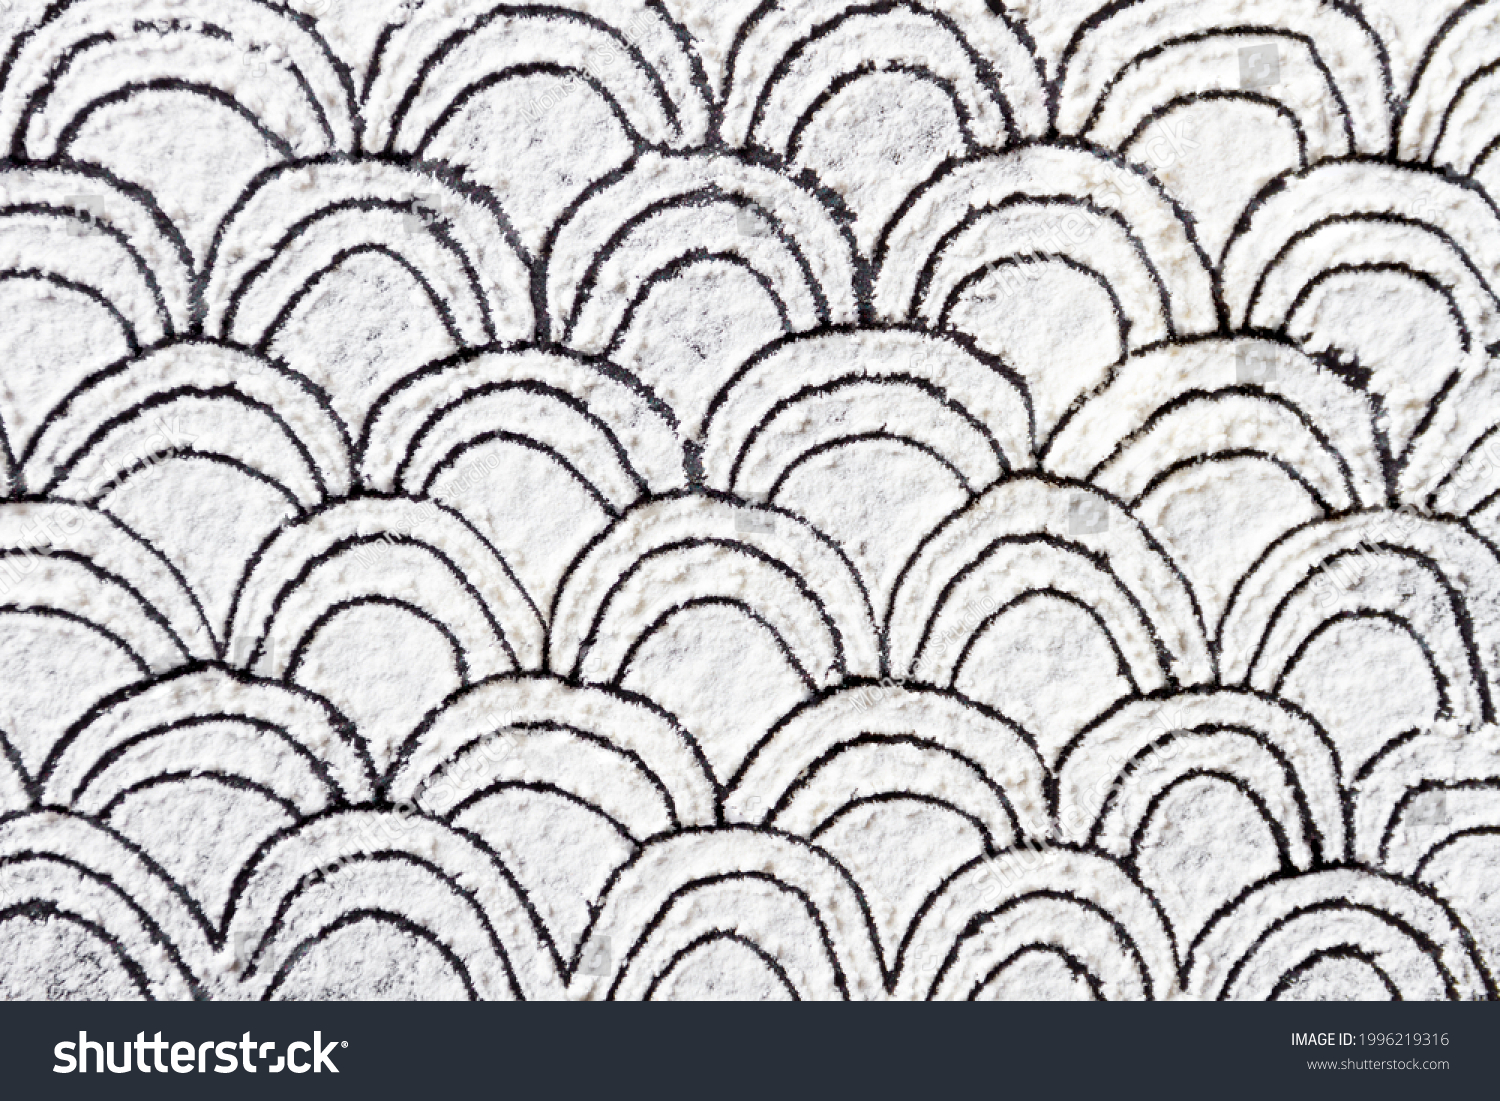 Hand drawn geometric pattern ornament printed on white flour, sand, powder. Bakery background design template mockup. Black and white package design. Abstract grainy texture. Minimalist wallpaper. #1996219316